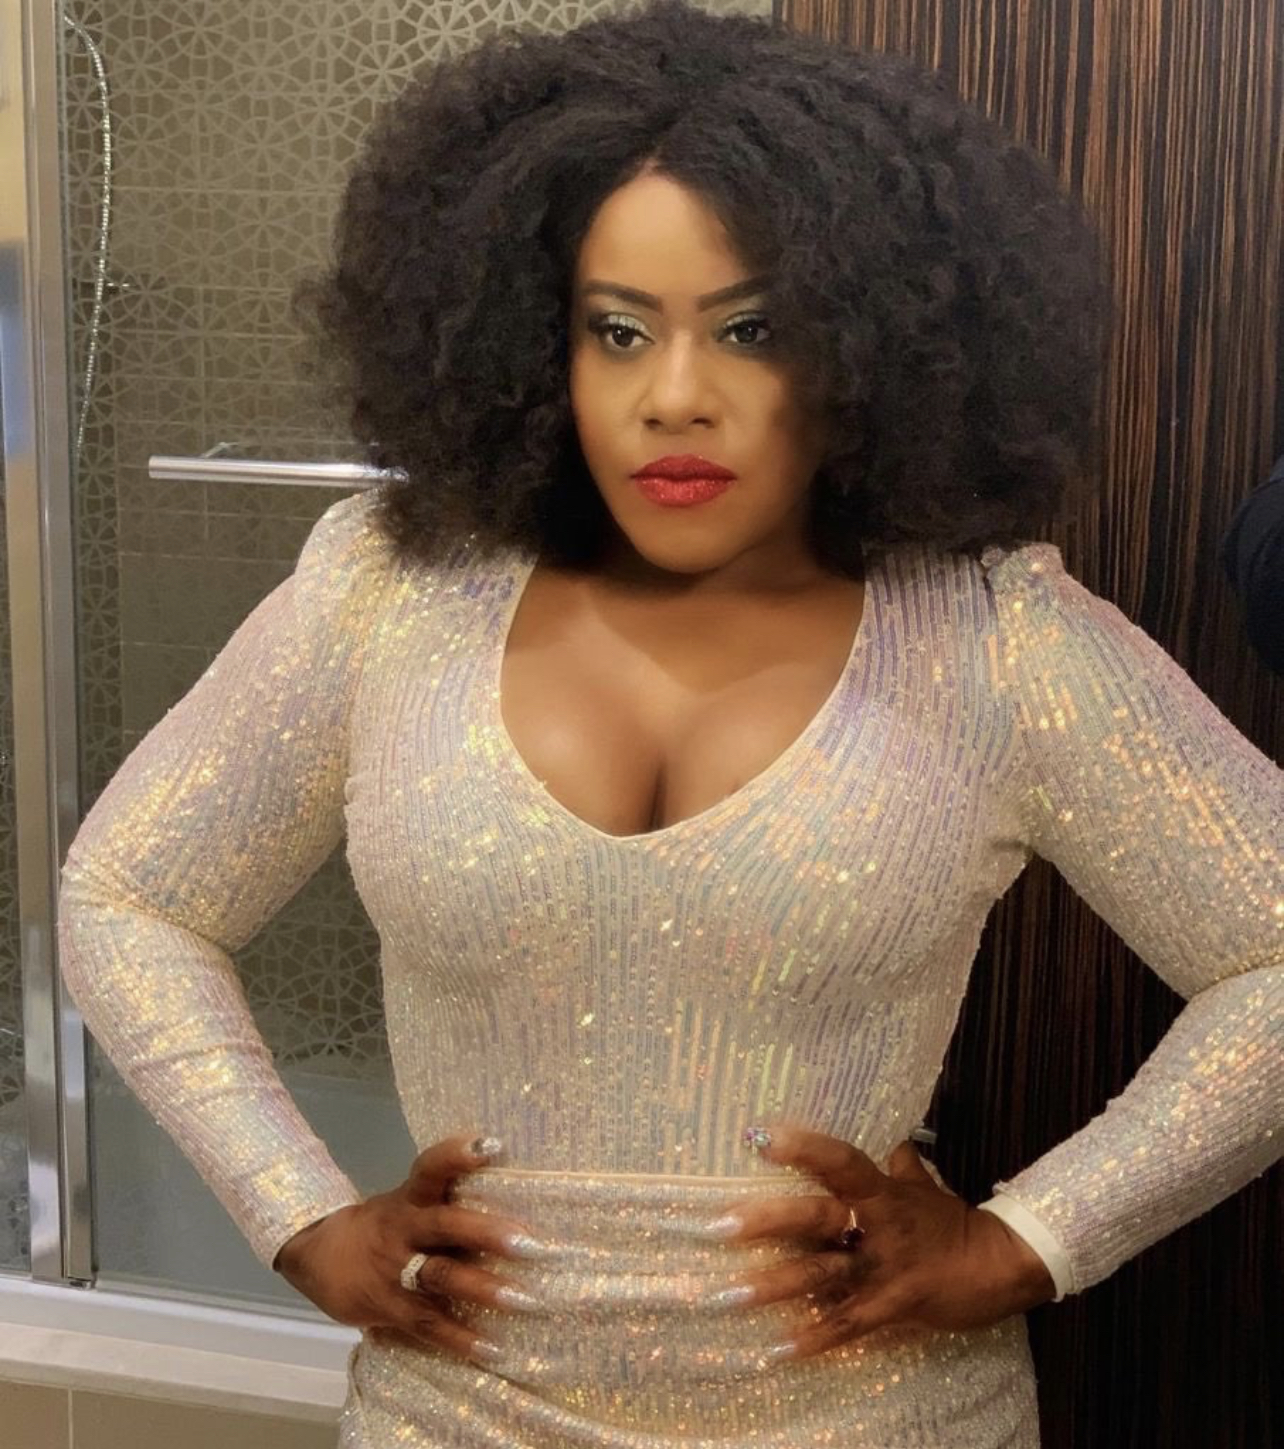 ETANA Exposes artiste who tried to entrap her at his studio ON ‘RAPE CULTURE’